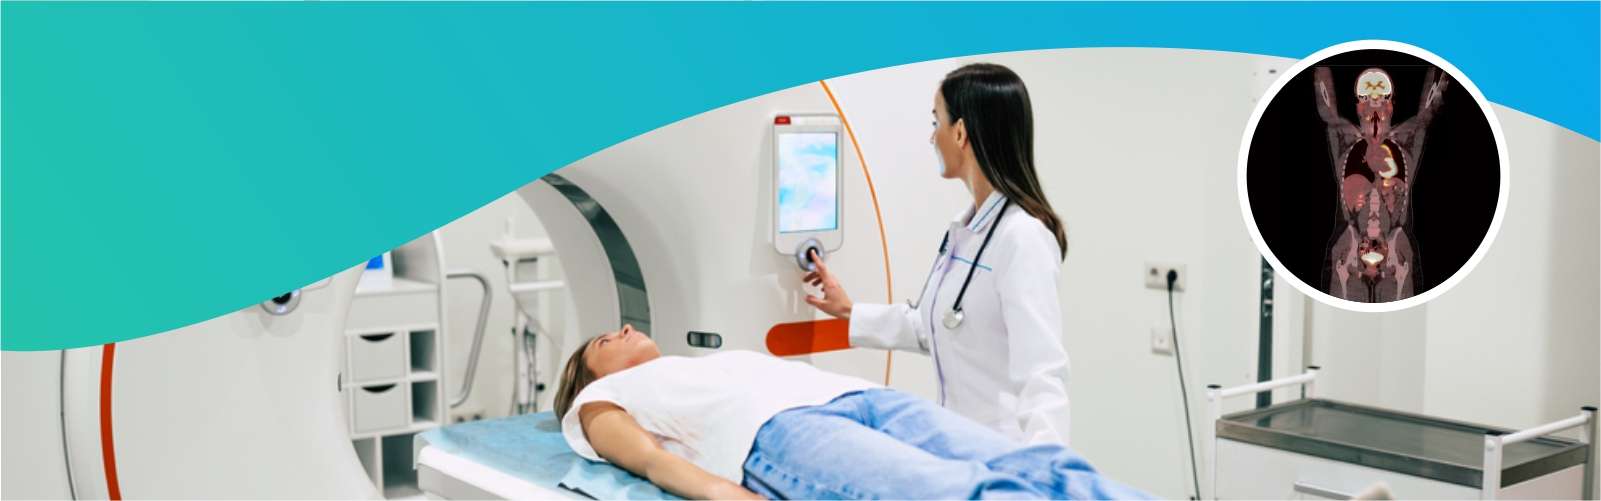 What Are the Benefits of Choosing NABH Accredited CT Scan Centre for HRTC Chest Scan?